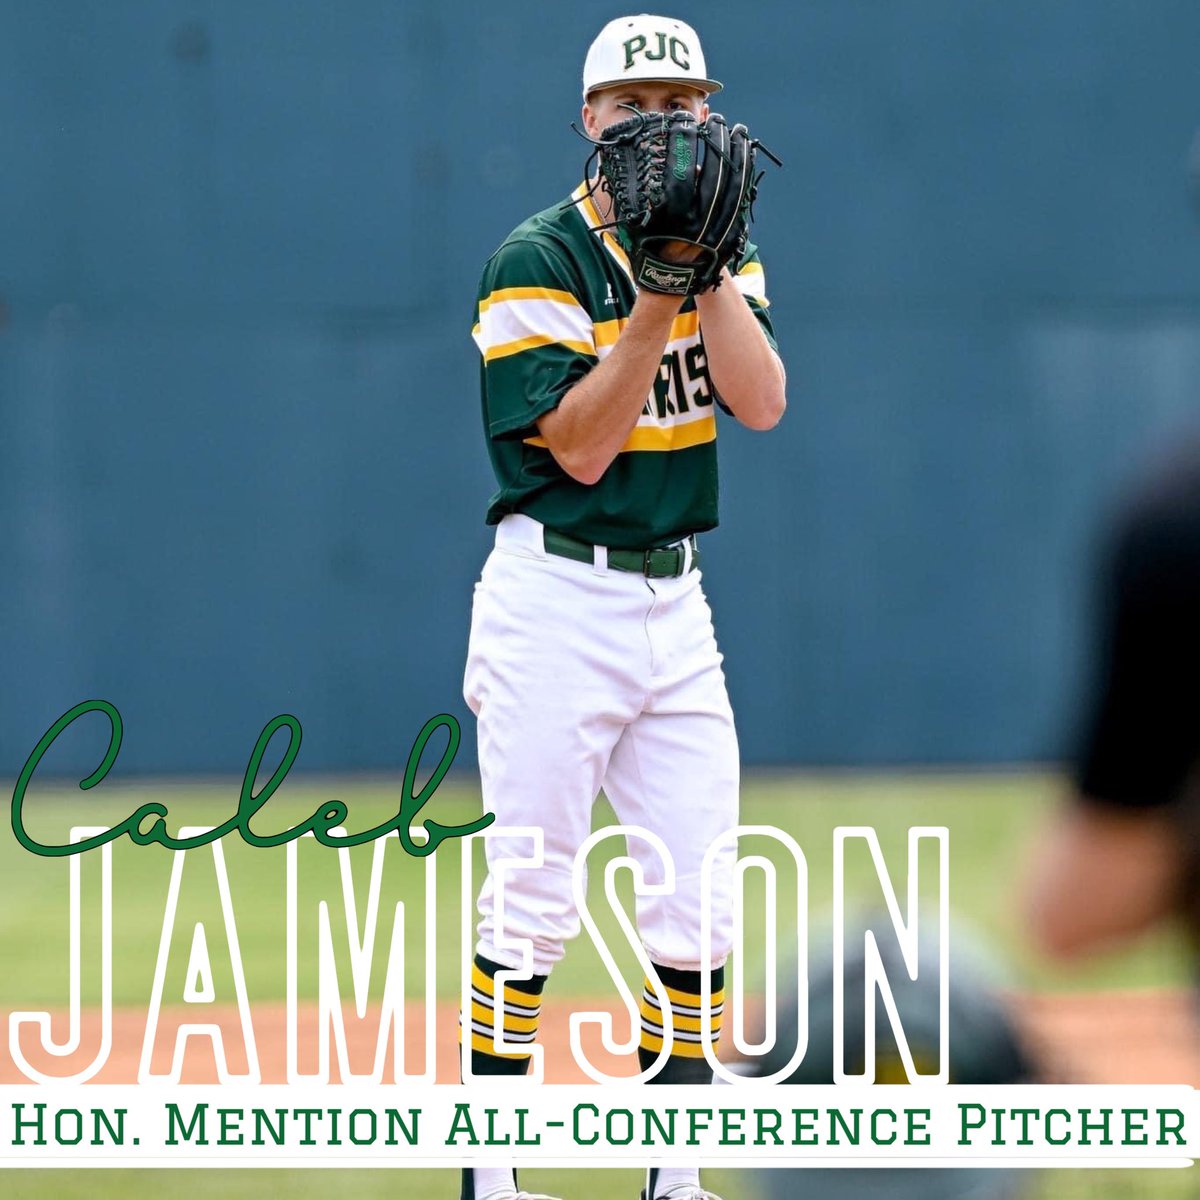 Congratulations to Caleb Jameson on being named Honorable Mention All-Conference Pitcher!

@CalebCJ22 | Hon. Mention P

#PJCbaseball #BuiltDifferent